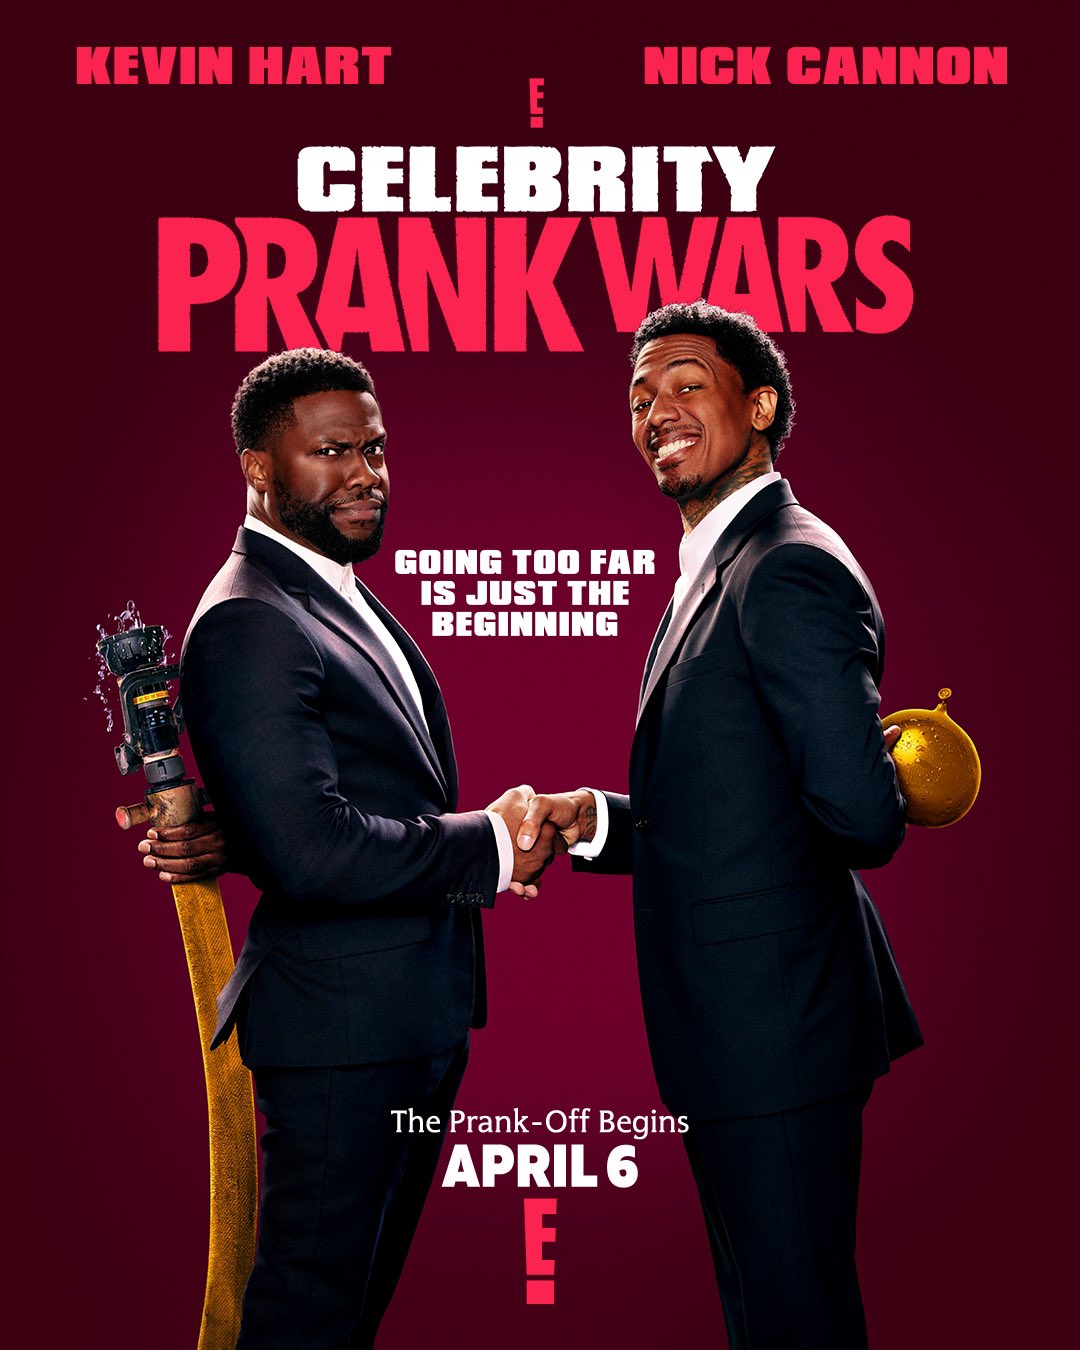 Nick Cannon & Kevin Hart Bring “Celebrity Prank Wars” to E! Network